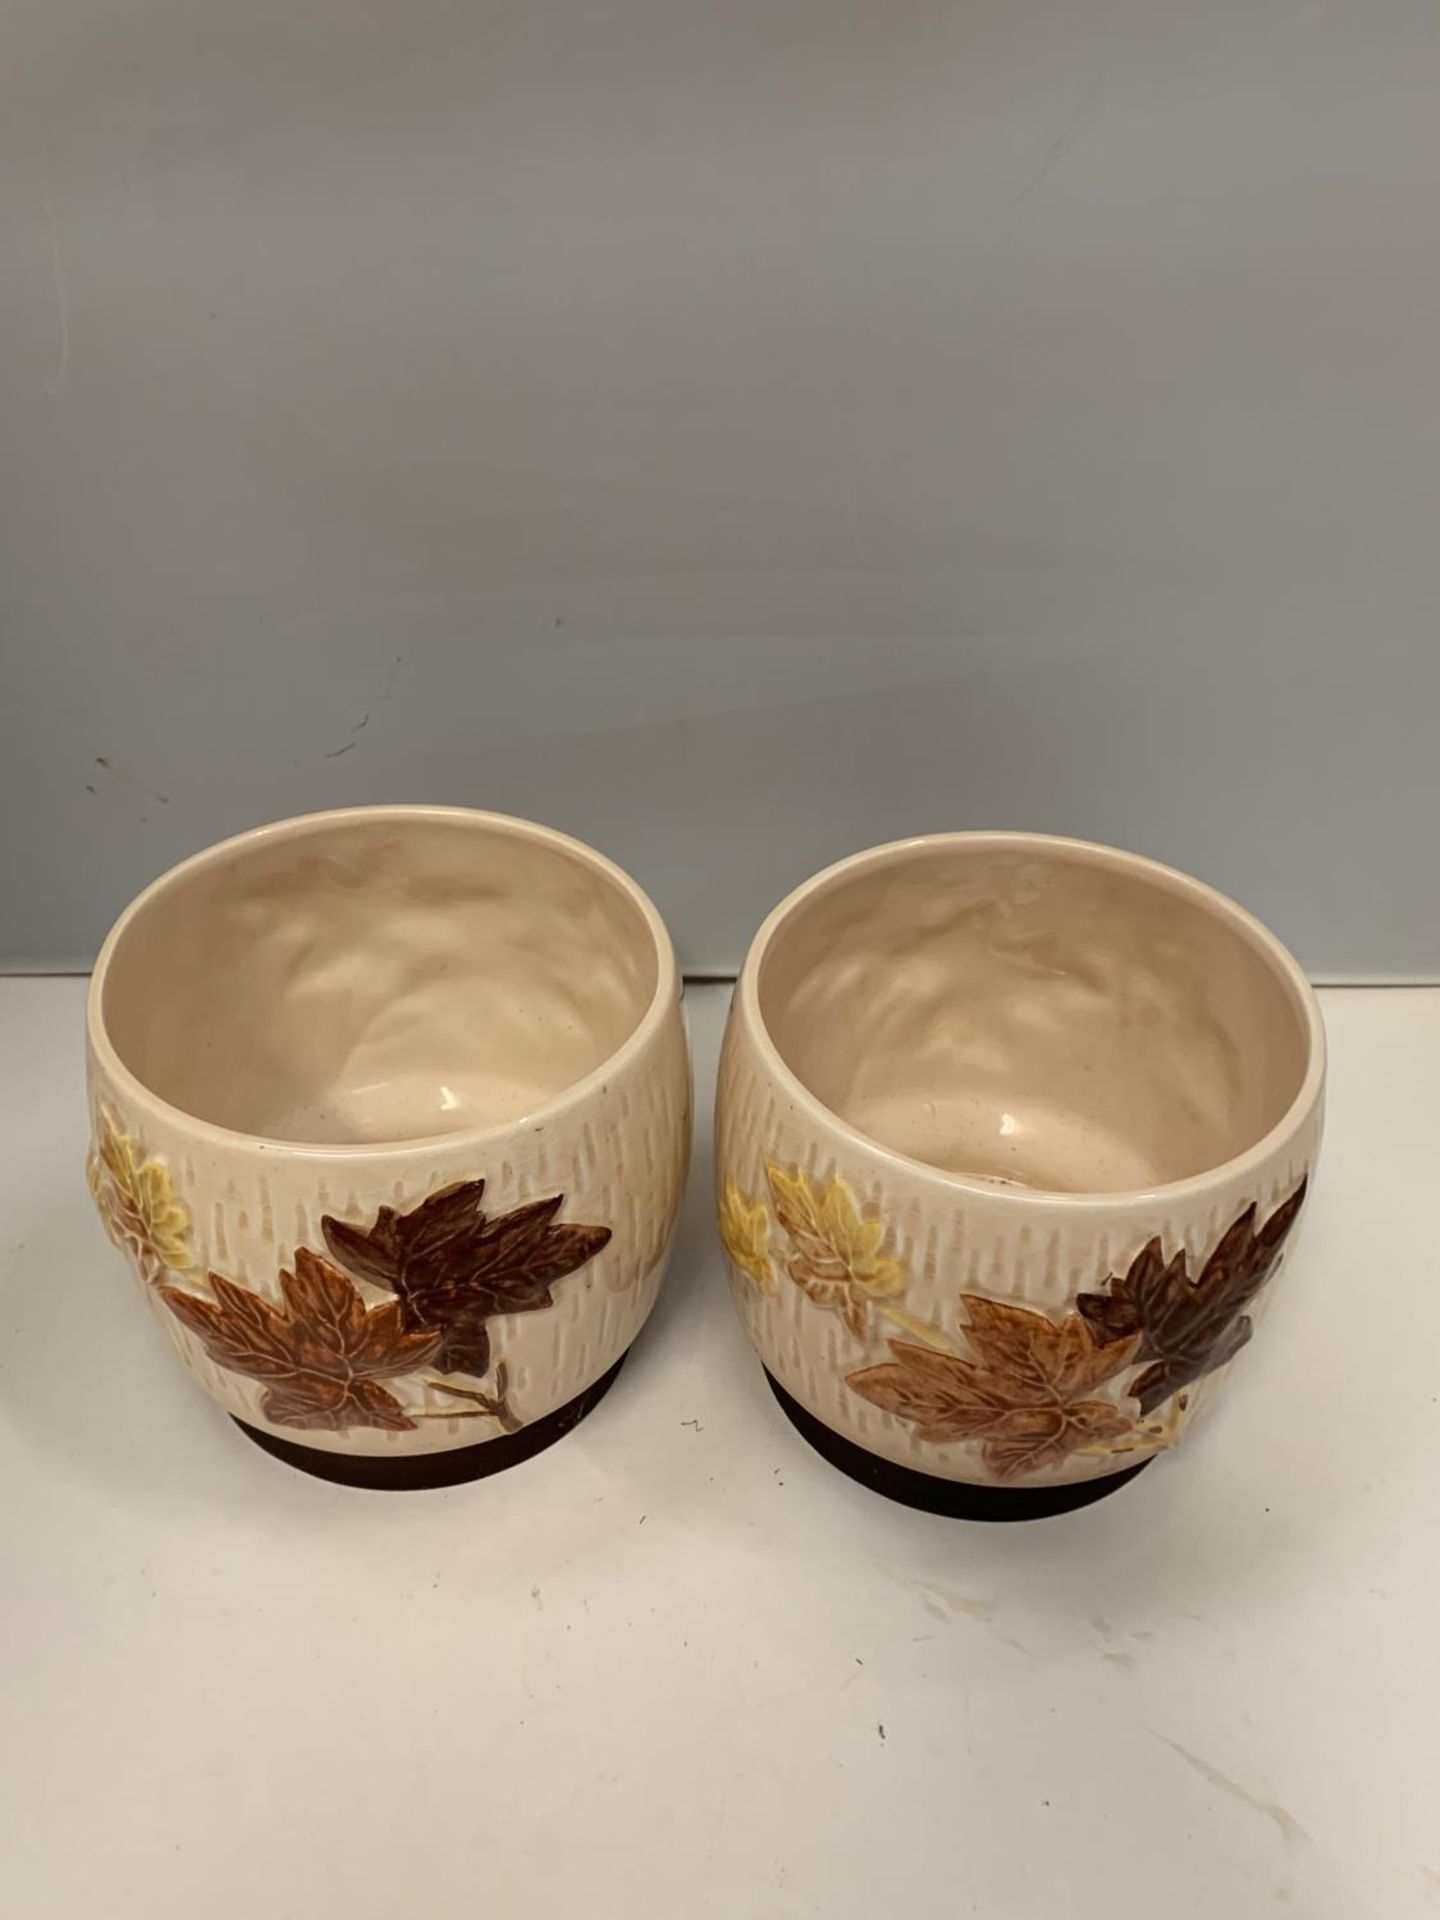 THREE ITEMS OF SYLVAC TO INCLUDE TWO PLANT POTS CREAM WITH LEAF DESIGN AND A VASE - Image 4 of 5